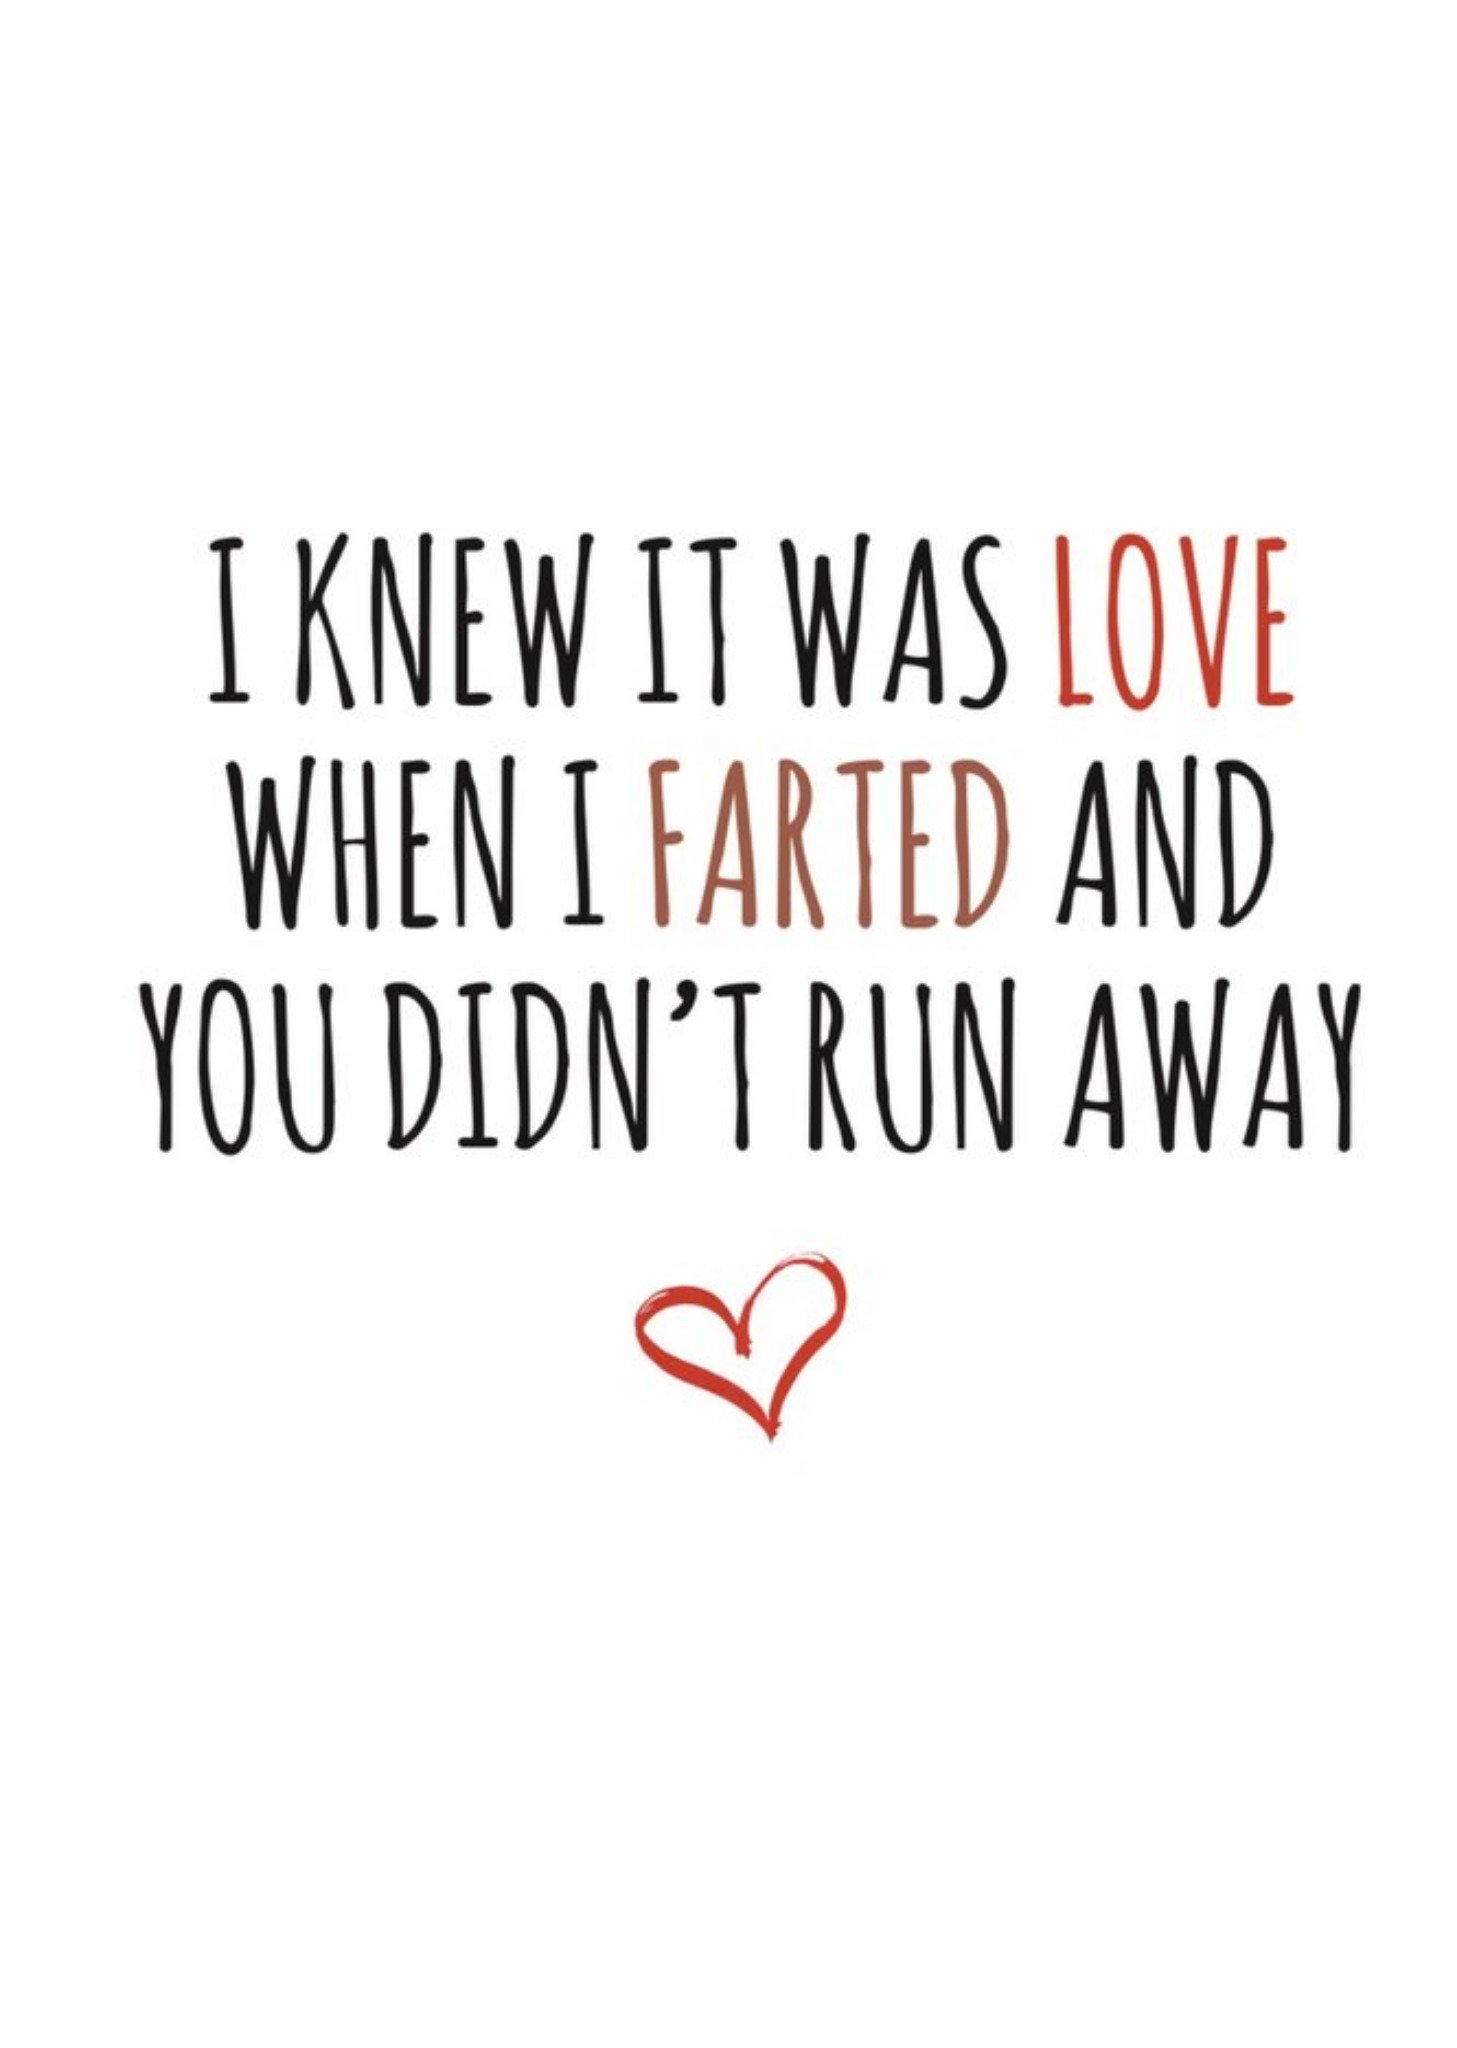 Banter King Typographical I Knew It Was Love Farted Didnt Run Away Funny Valentines Day Card Ecard